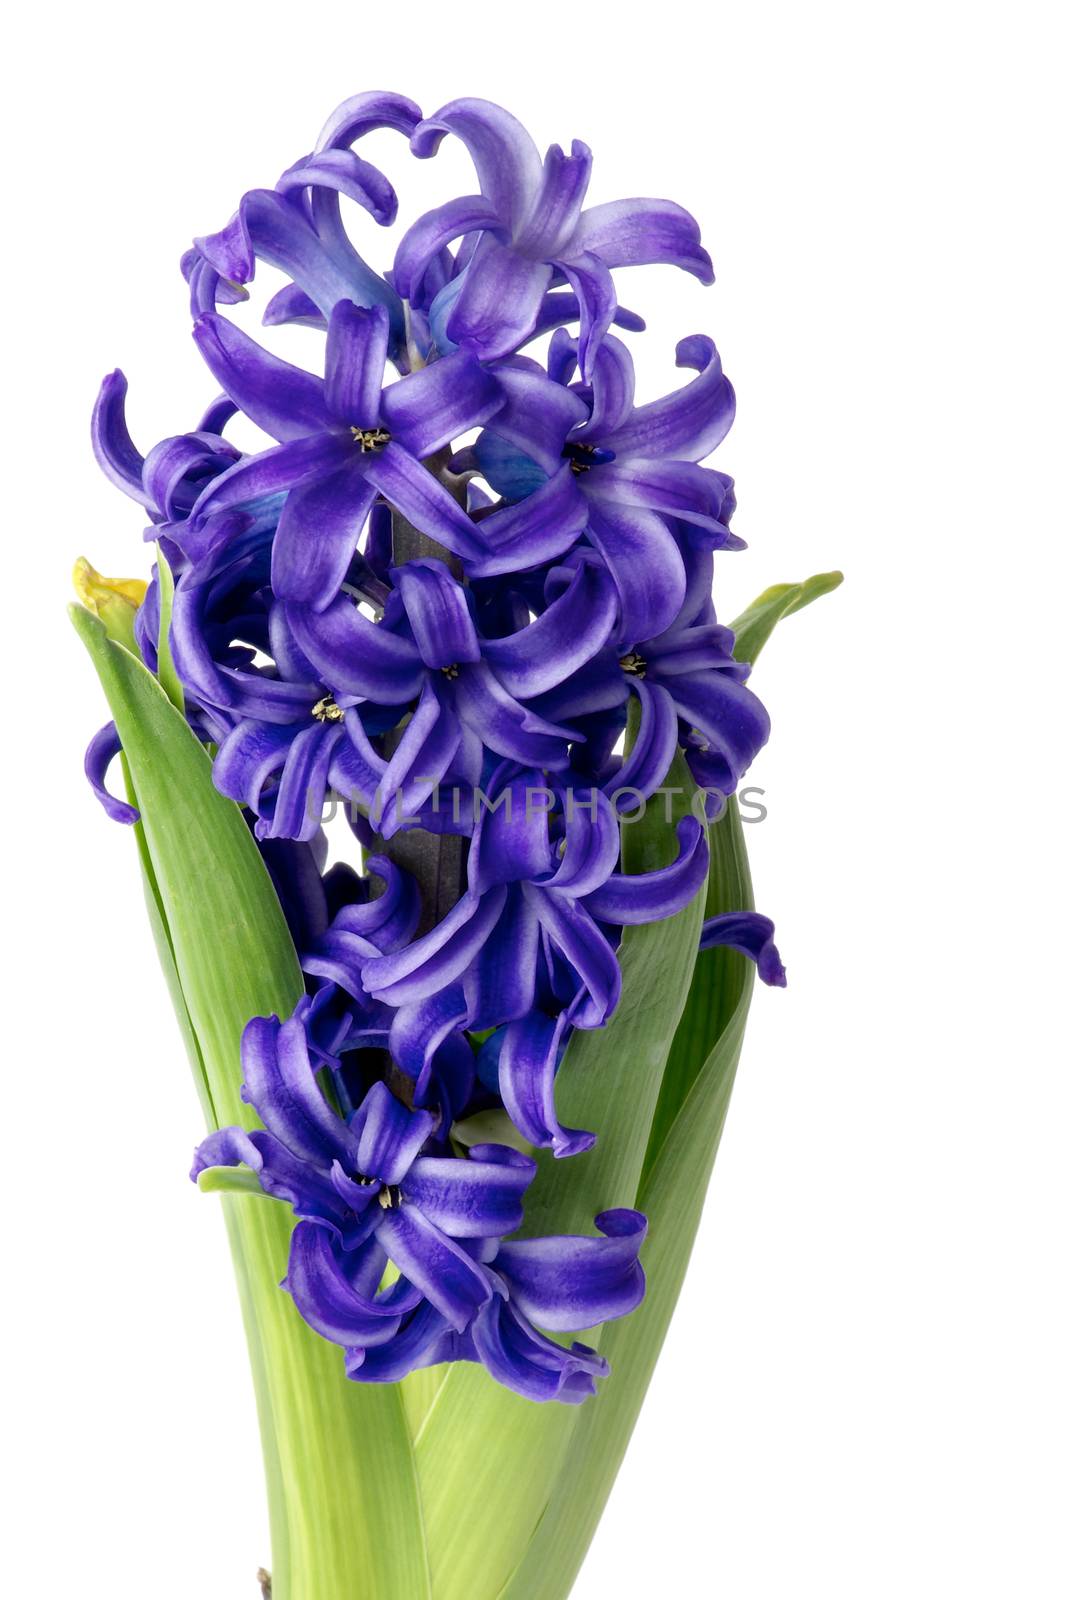 Beauty Purple Hyacinth with Leafs isolated on white background